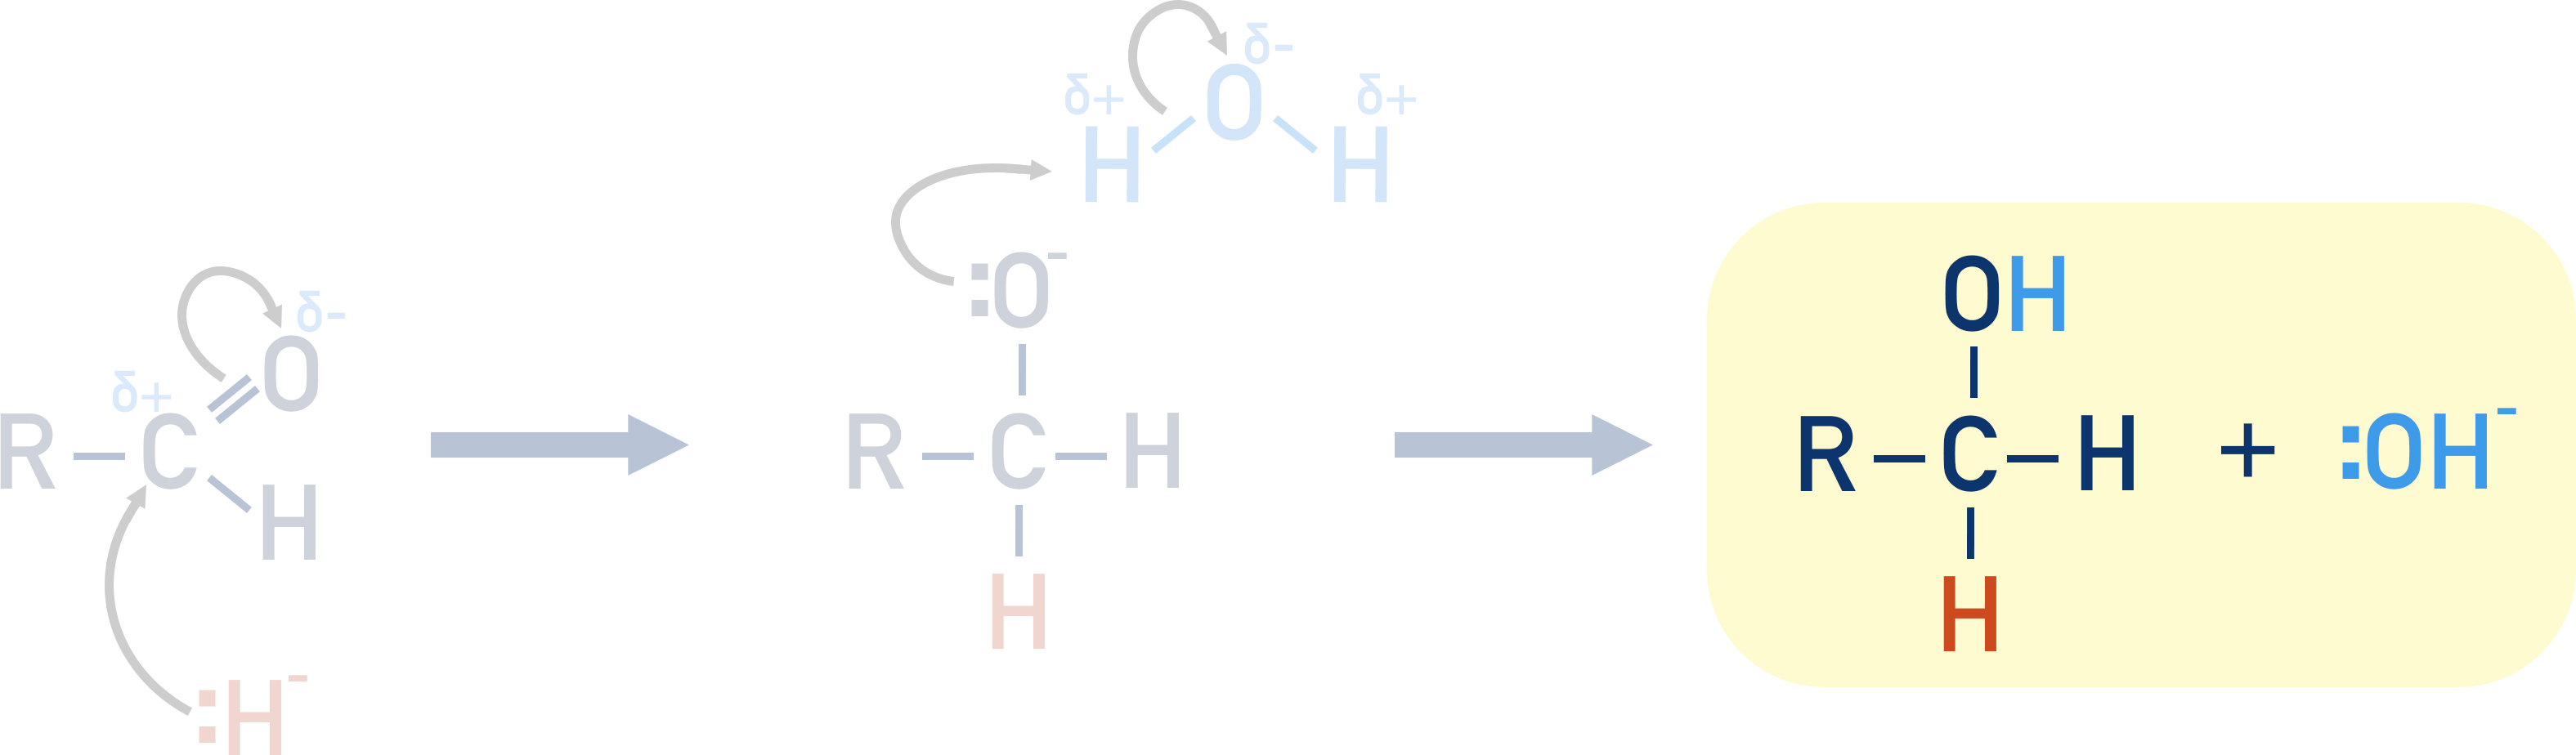 final step mechanism carbonyl reduction forming alcohol and hydroxide